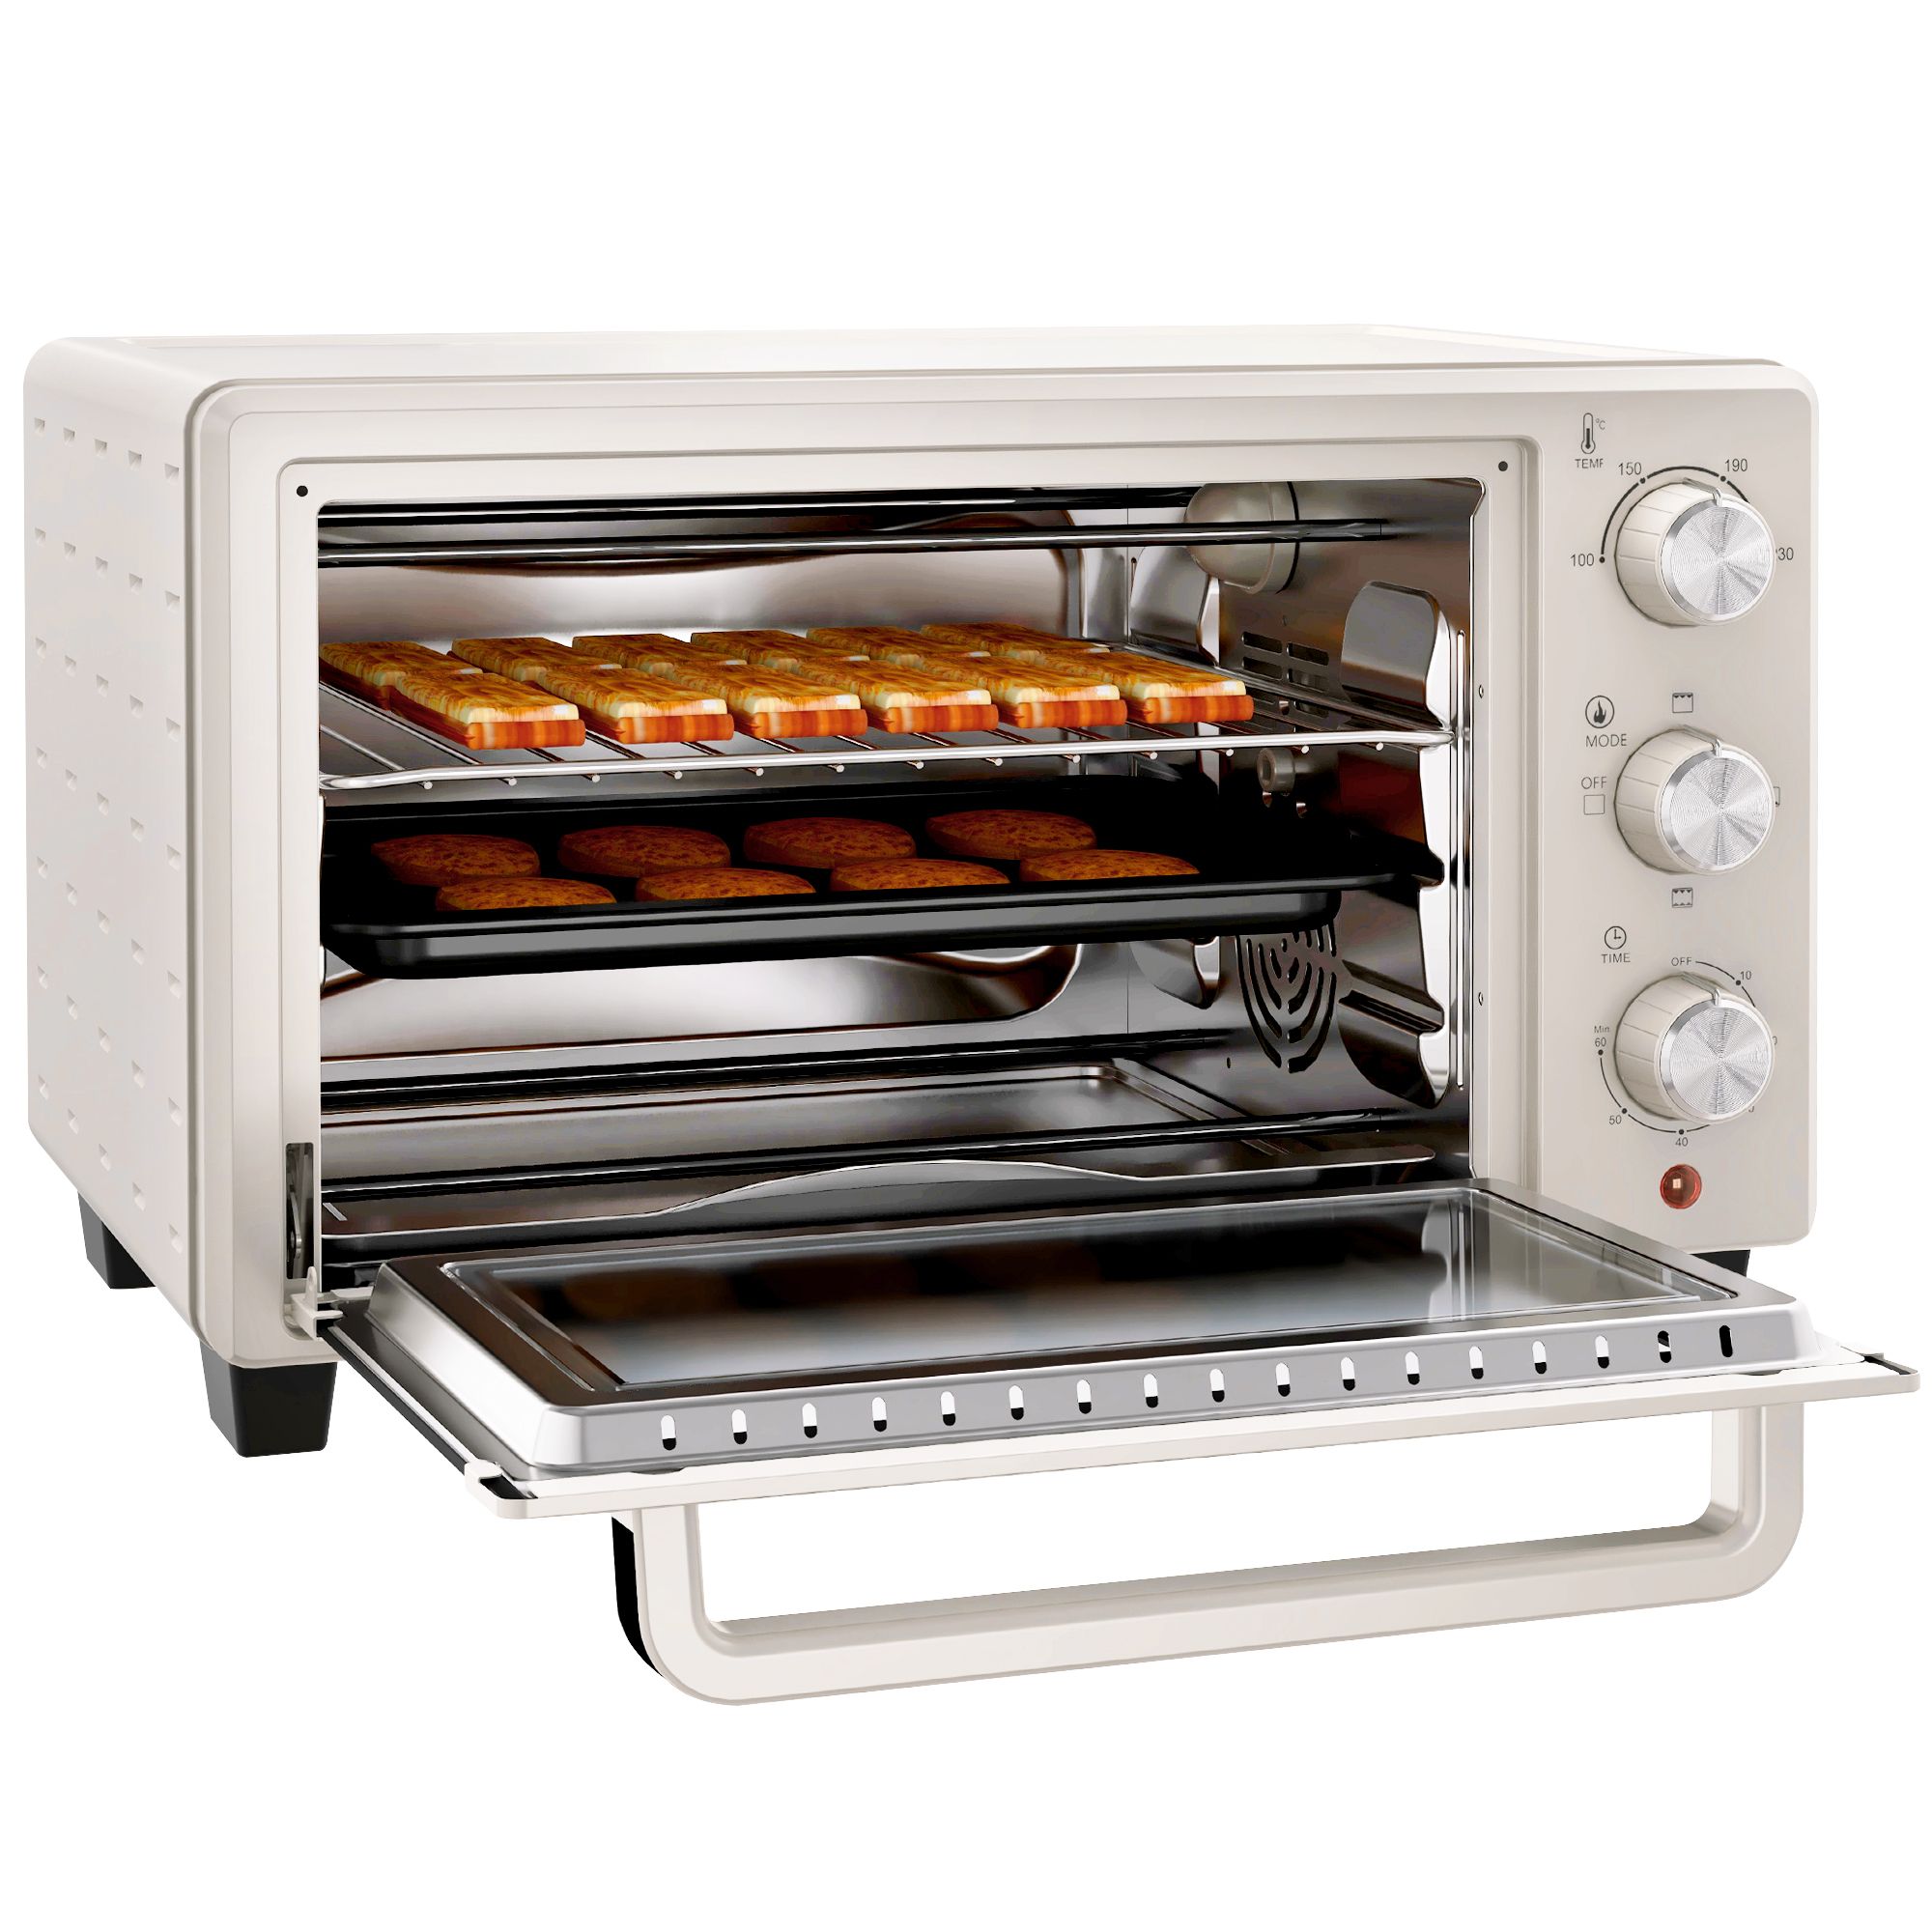 Homcom Mini Oven, 21l Countertop Electric Grill, Toaster Oven With Adjustable Temperature, Timer, Baking Tray And Wire Rack, 1400w, Cream